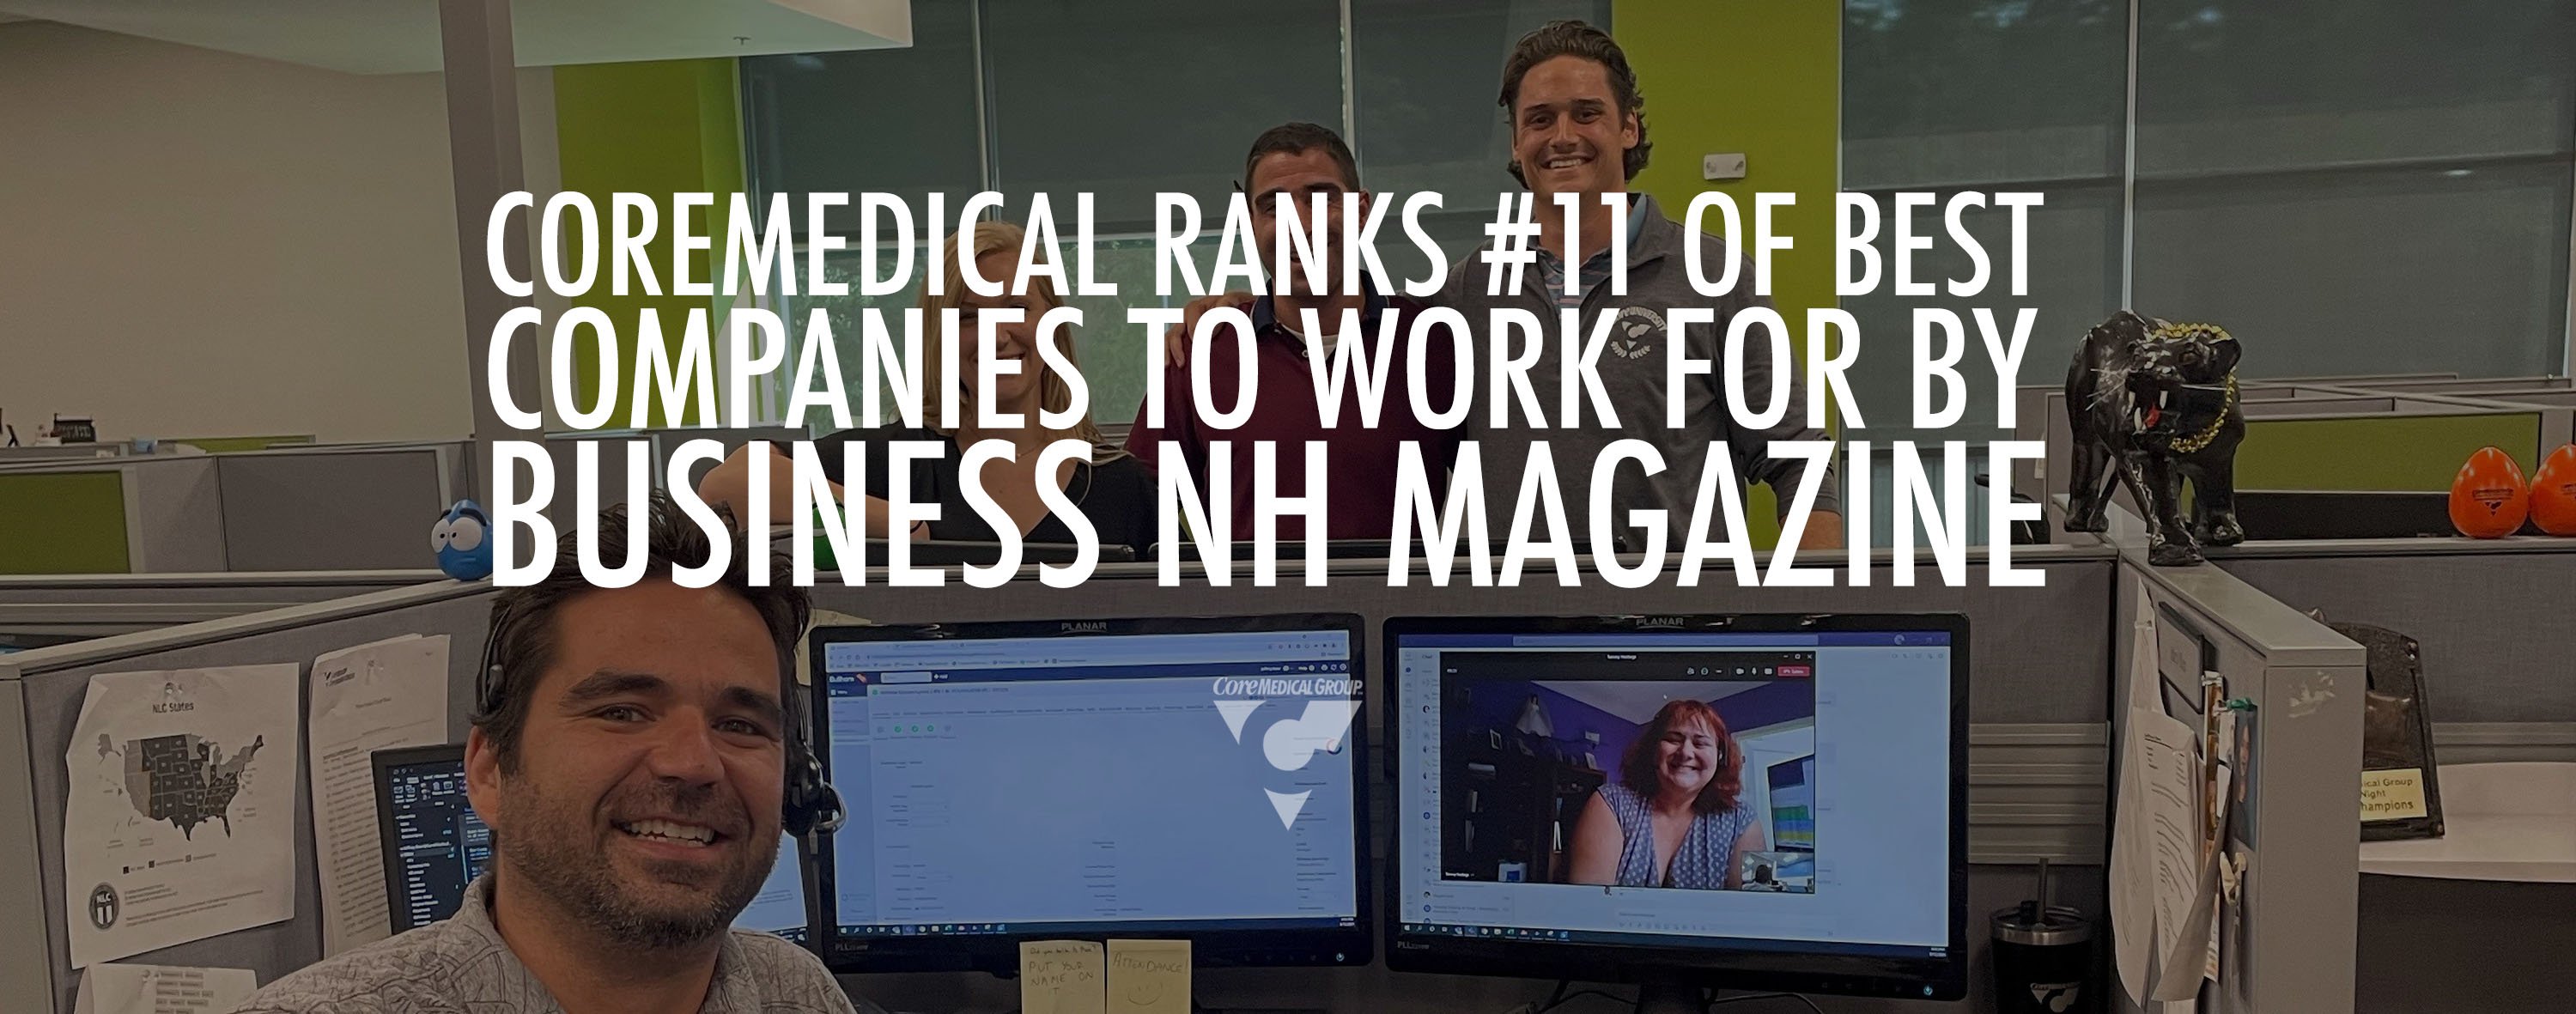 coremedical-ranks-11th-best-company-to-work-for